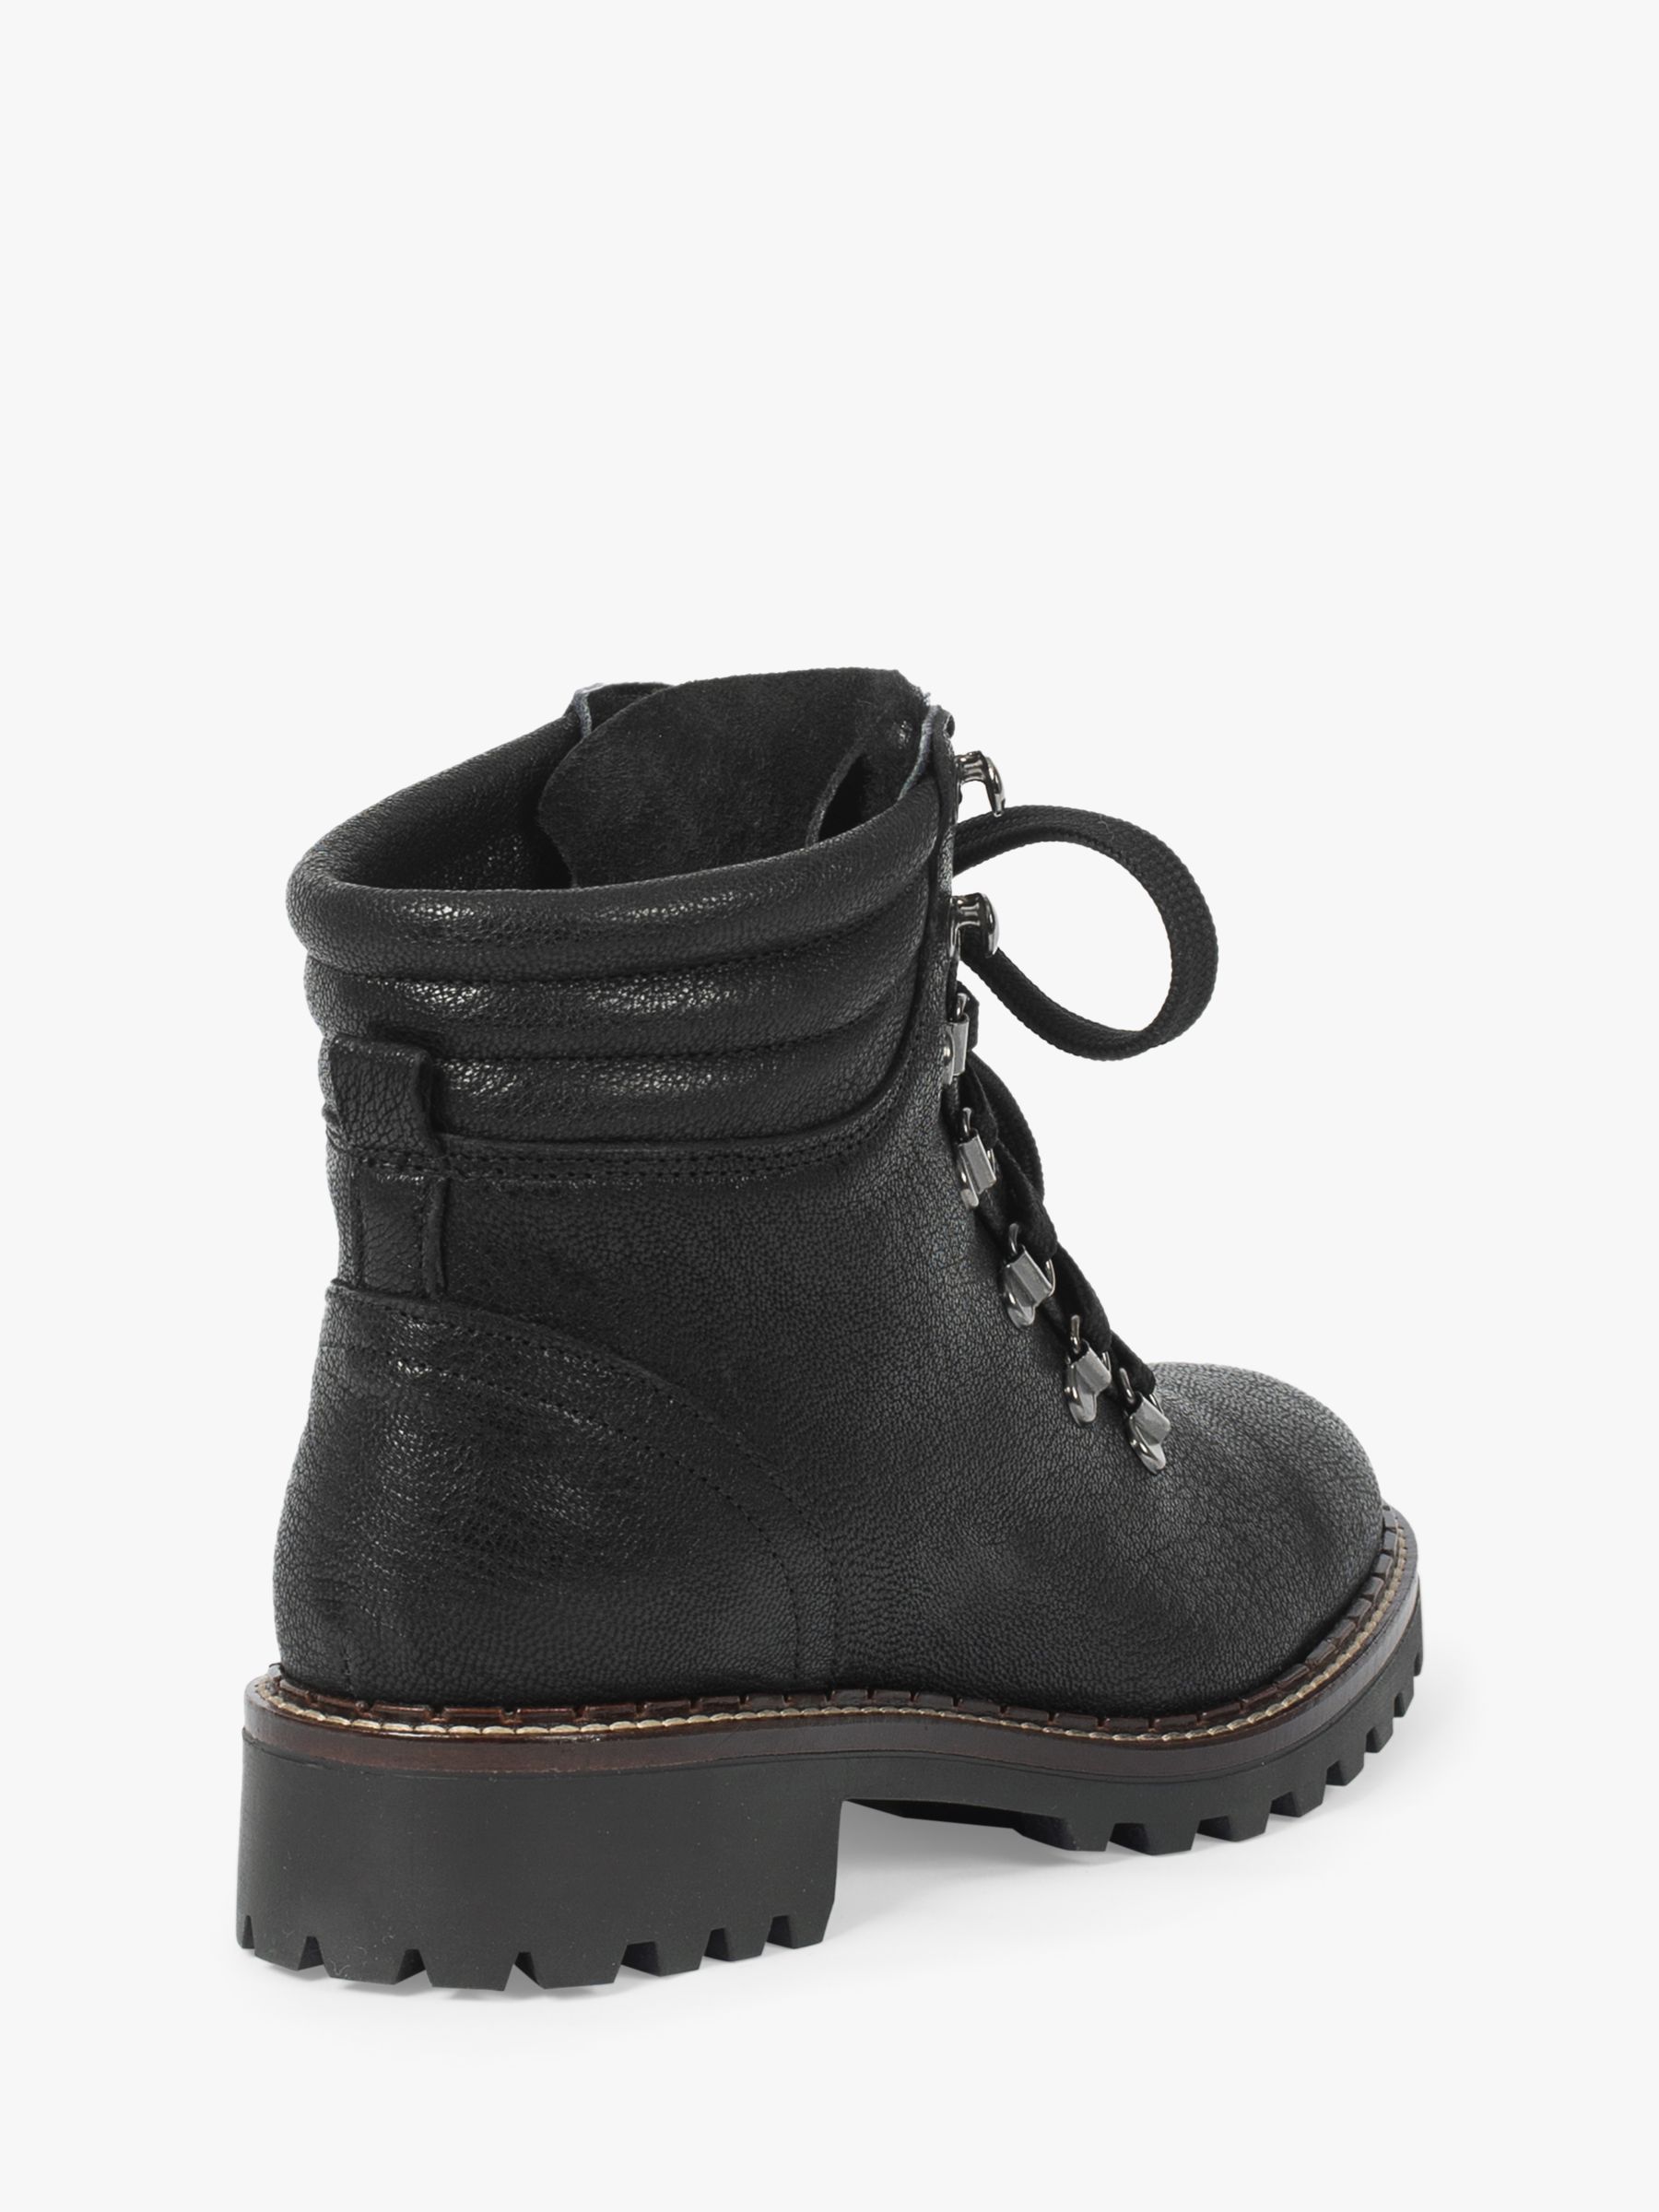 Celtic & Co. Leather Hiker Boots at John Lewis & Partners